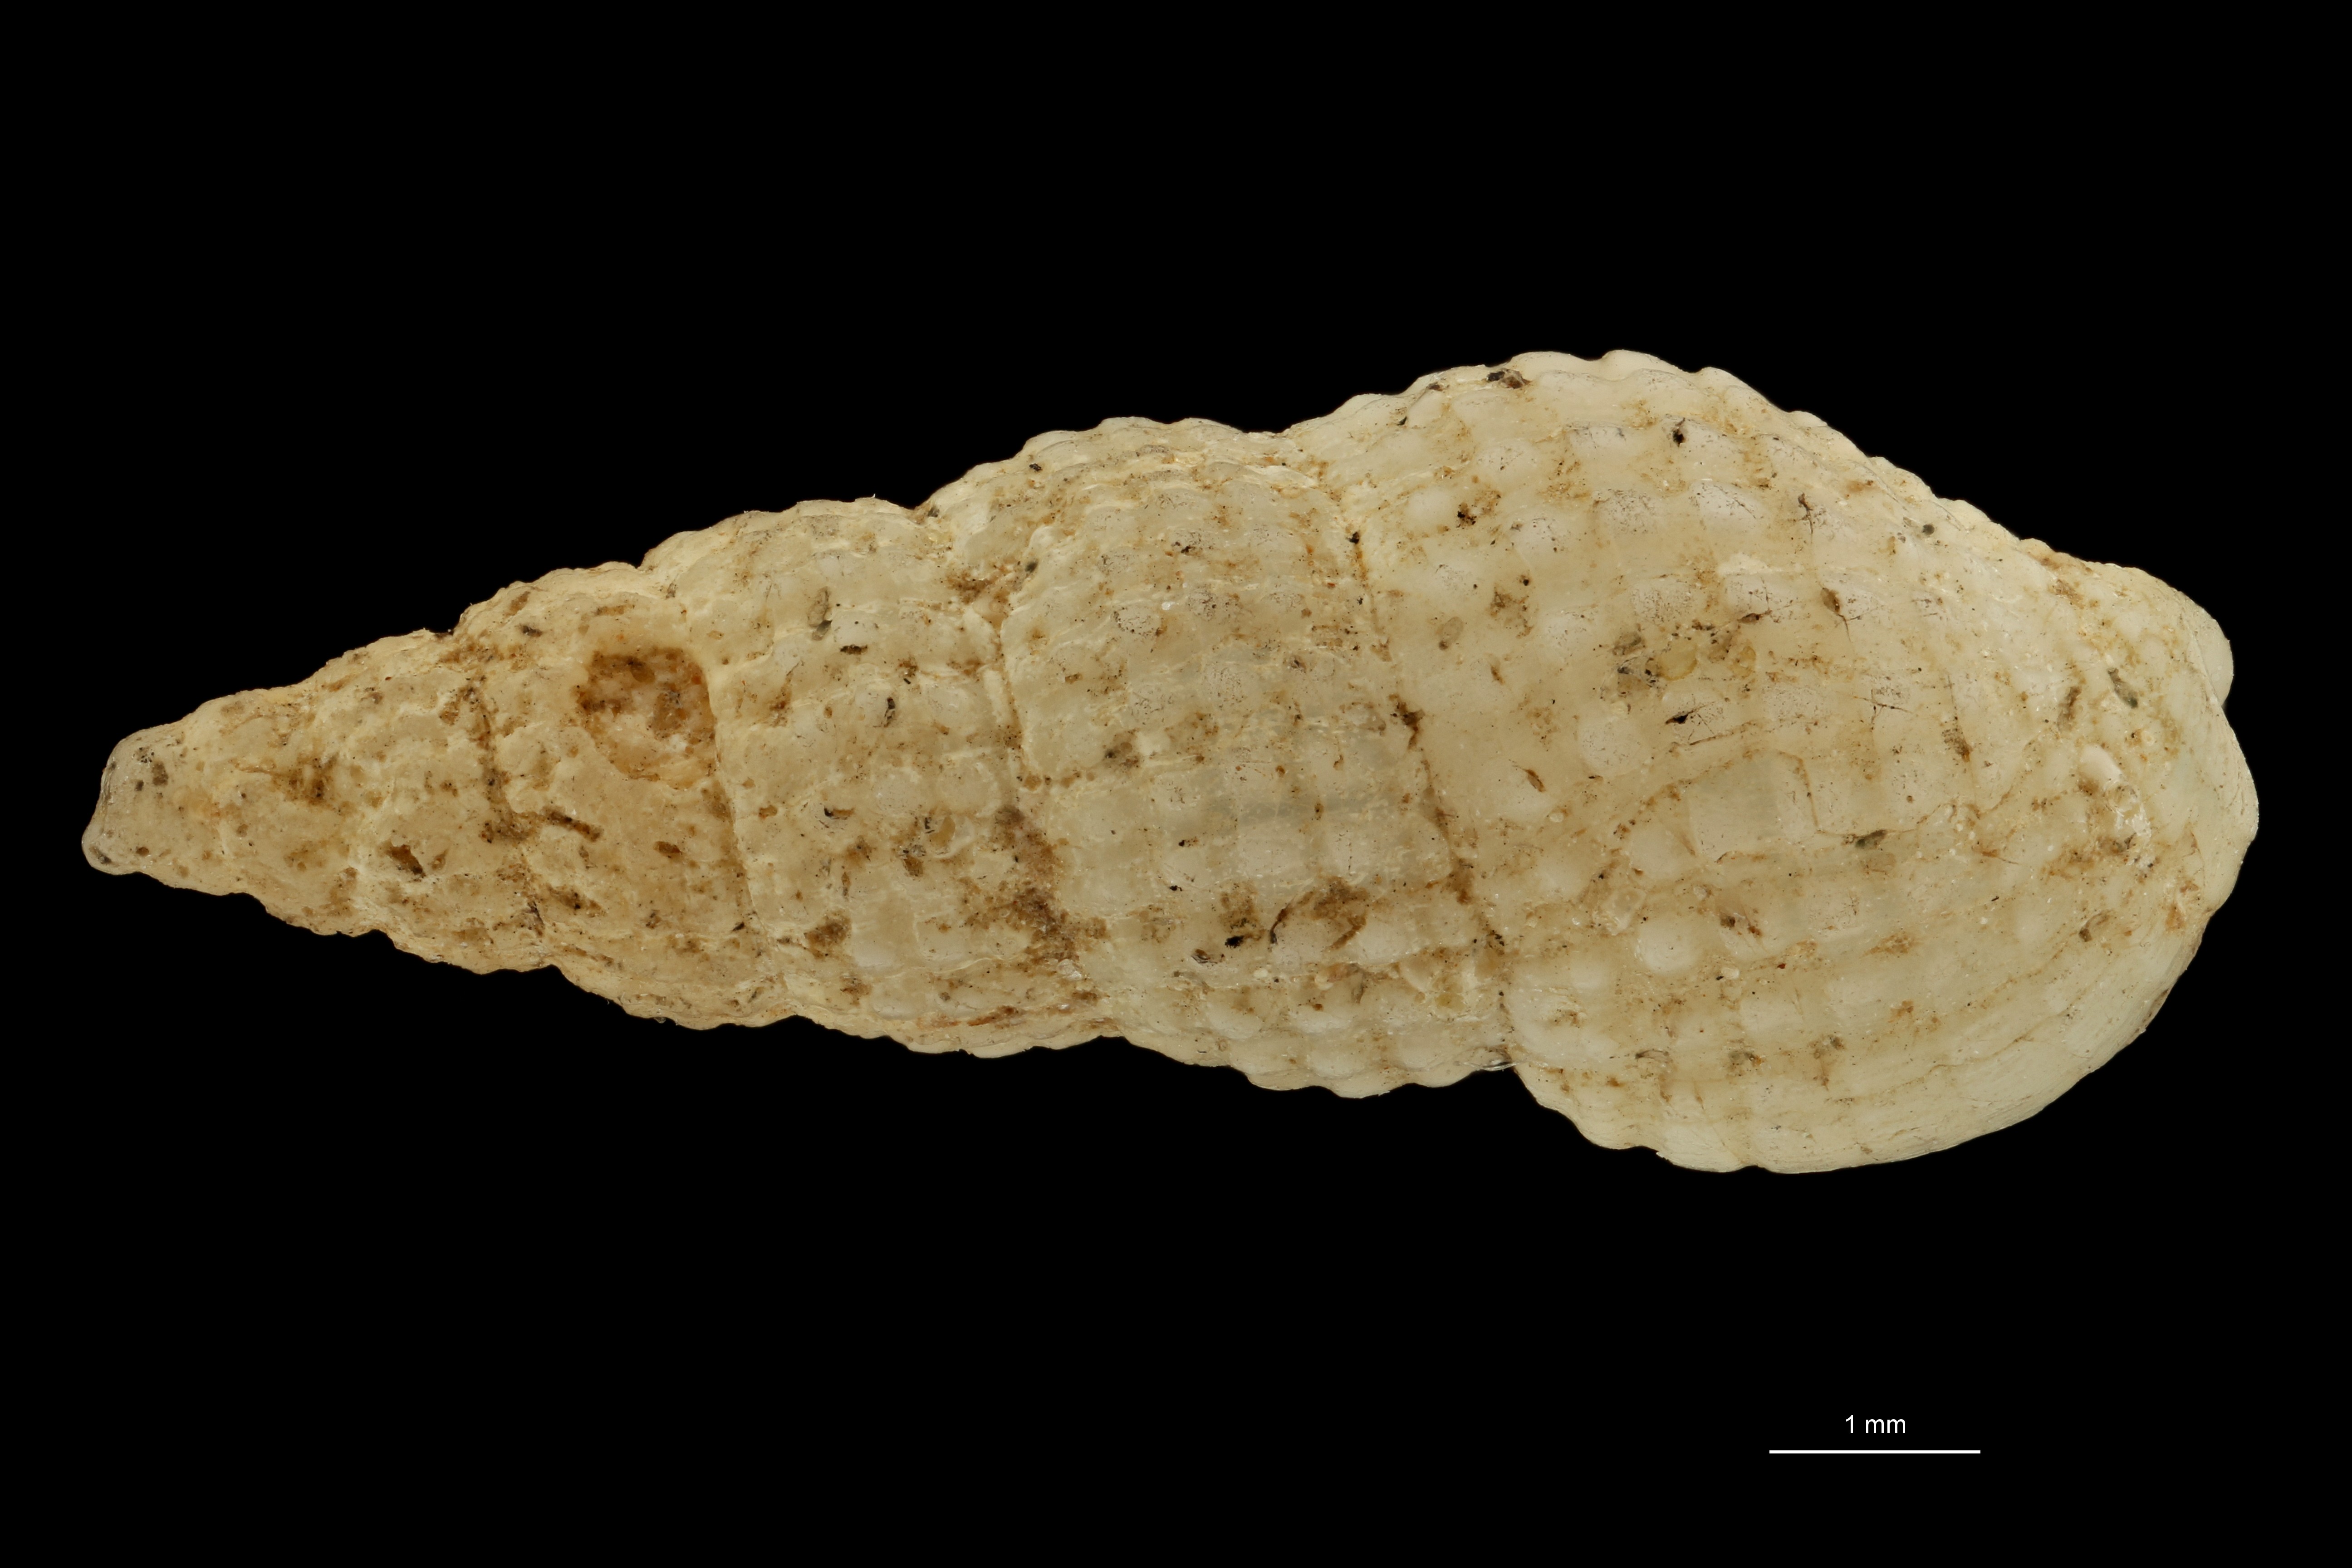 BE-RBINS-INV TYPE MT 613 Donovania candissima var. tenuisculpta DORSAL ZS PMax Scaled.jpg